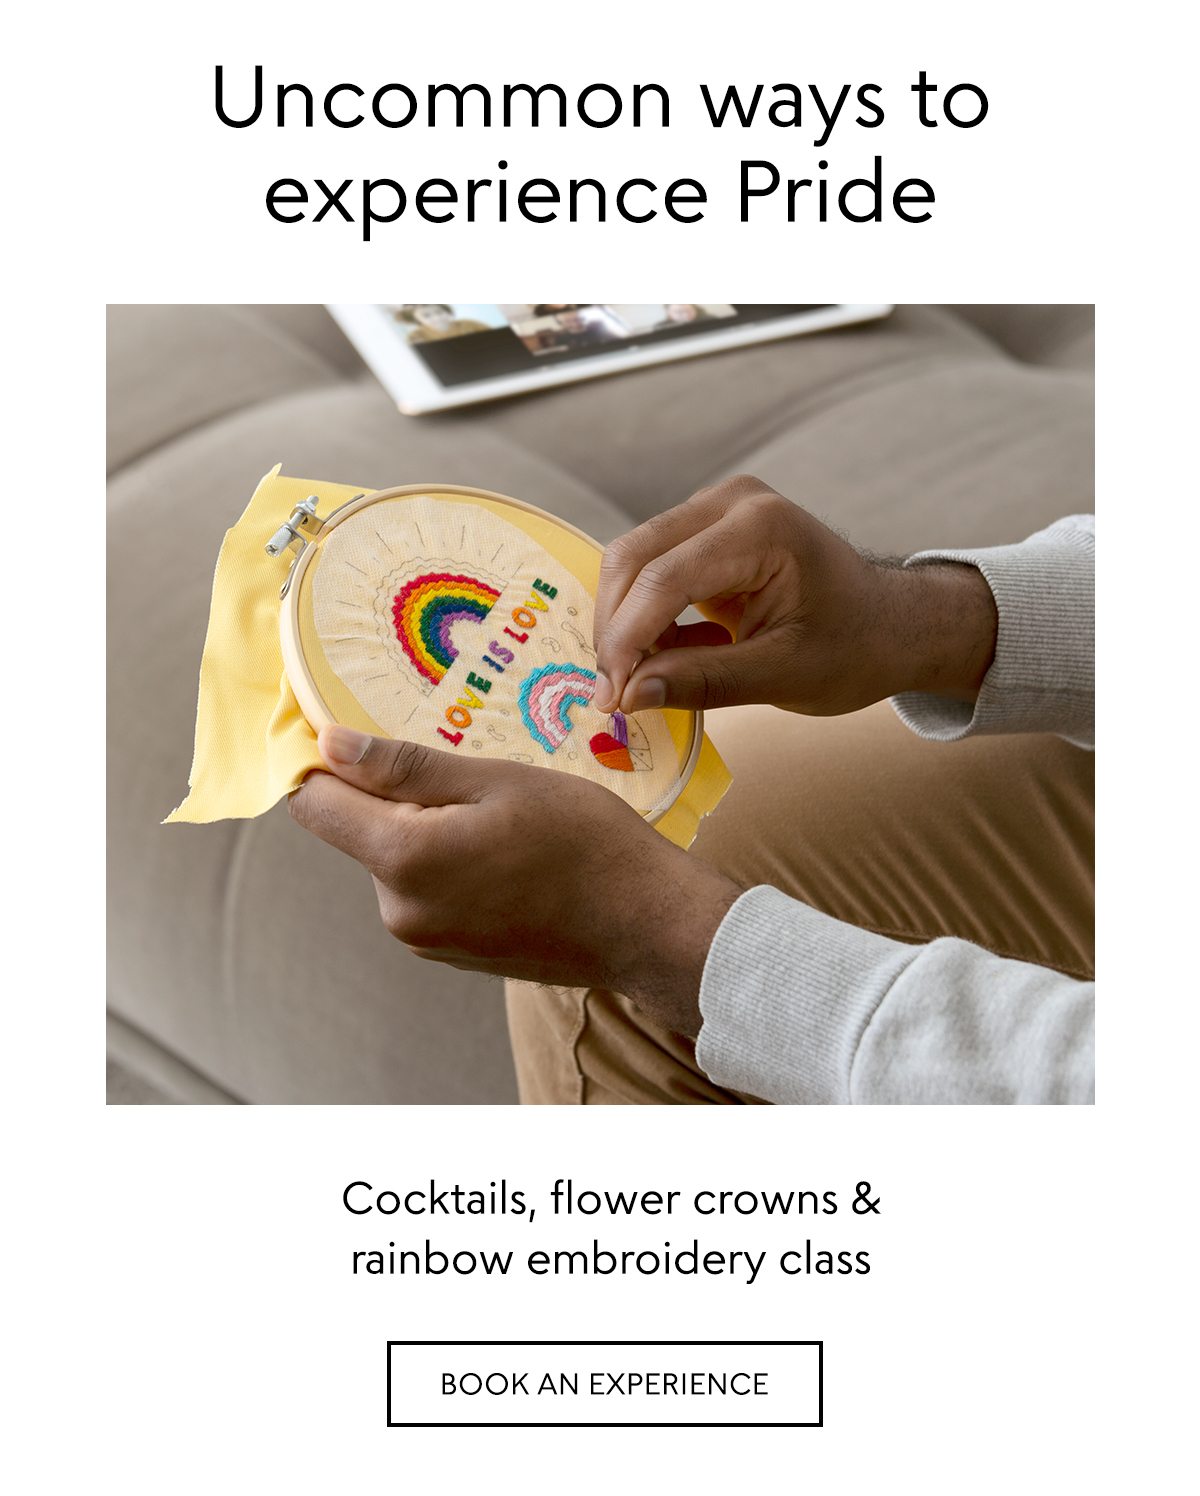 Uncommon ways to experience Pride: Cocktails, flower crowns & rainbow embroidery class. Book an experience now!